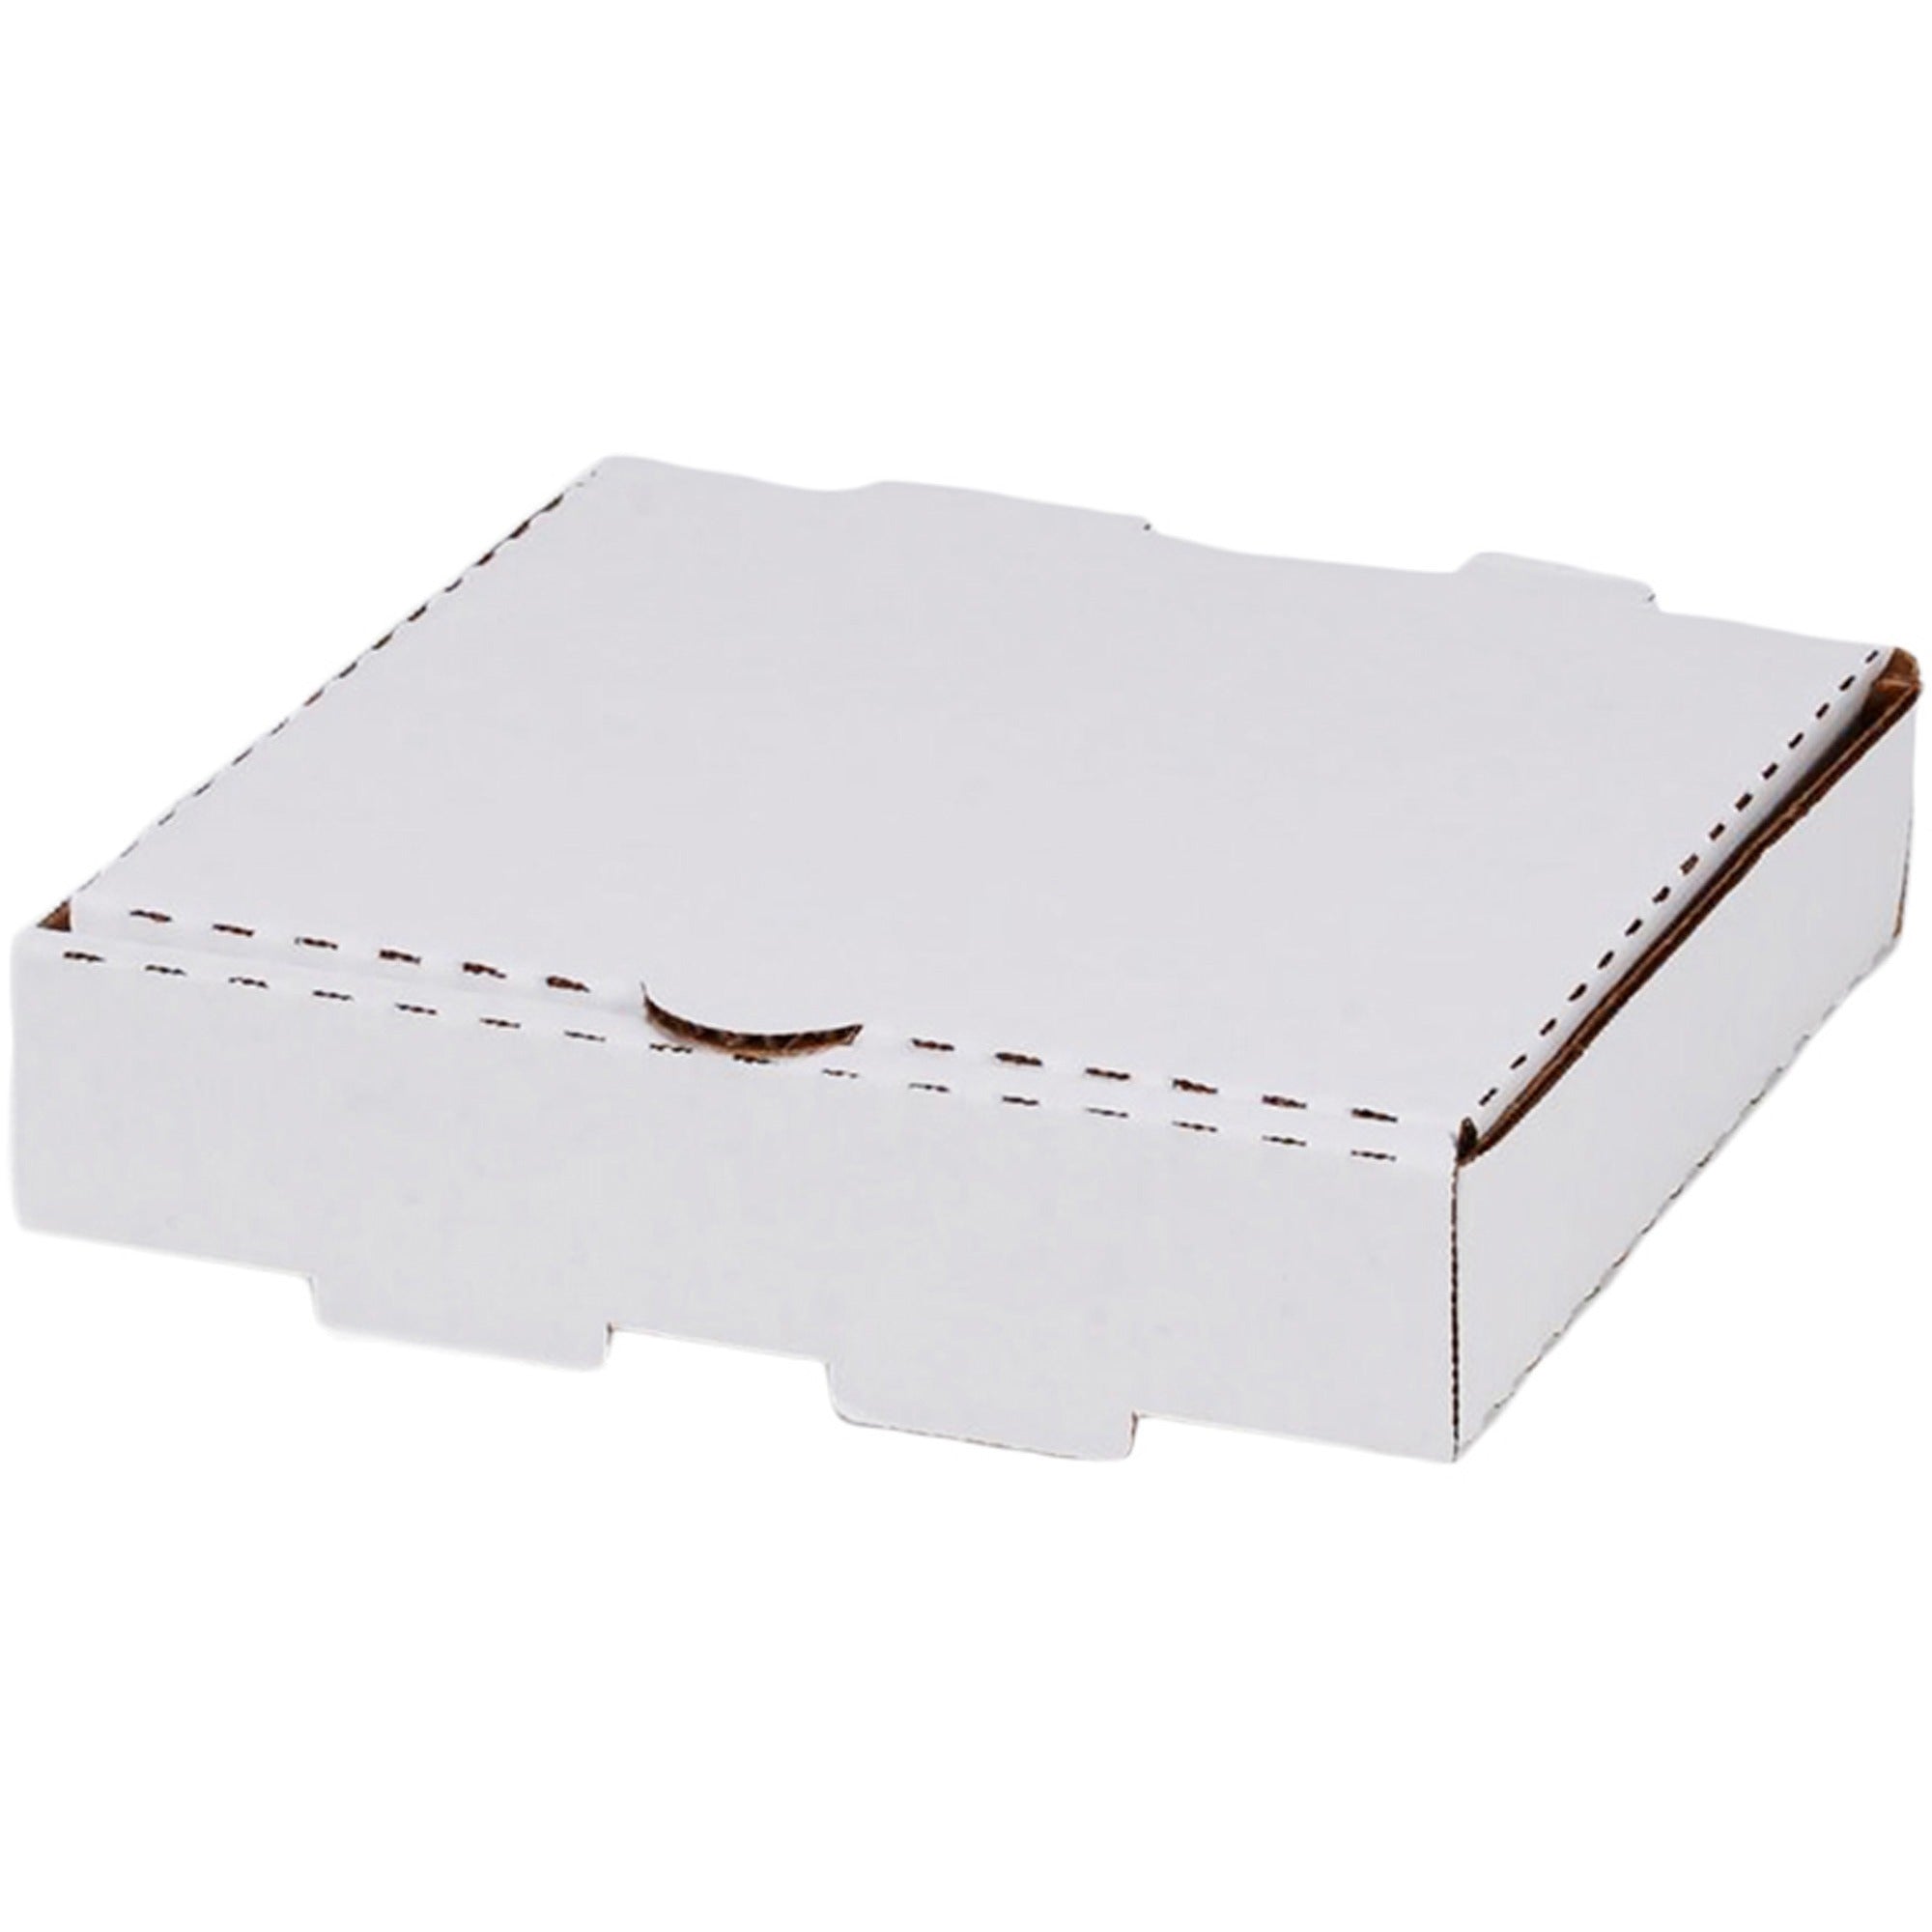 sct-tray-pizza-box-external-dimensions-8-width-x-8-height-corrugated-paperboard-white-for-pizza-food-storage-50-carton_sch707282317092 - 1